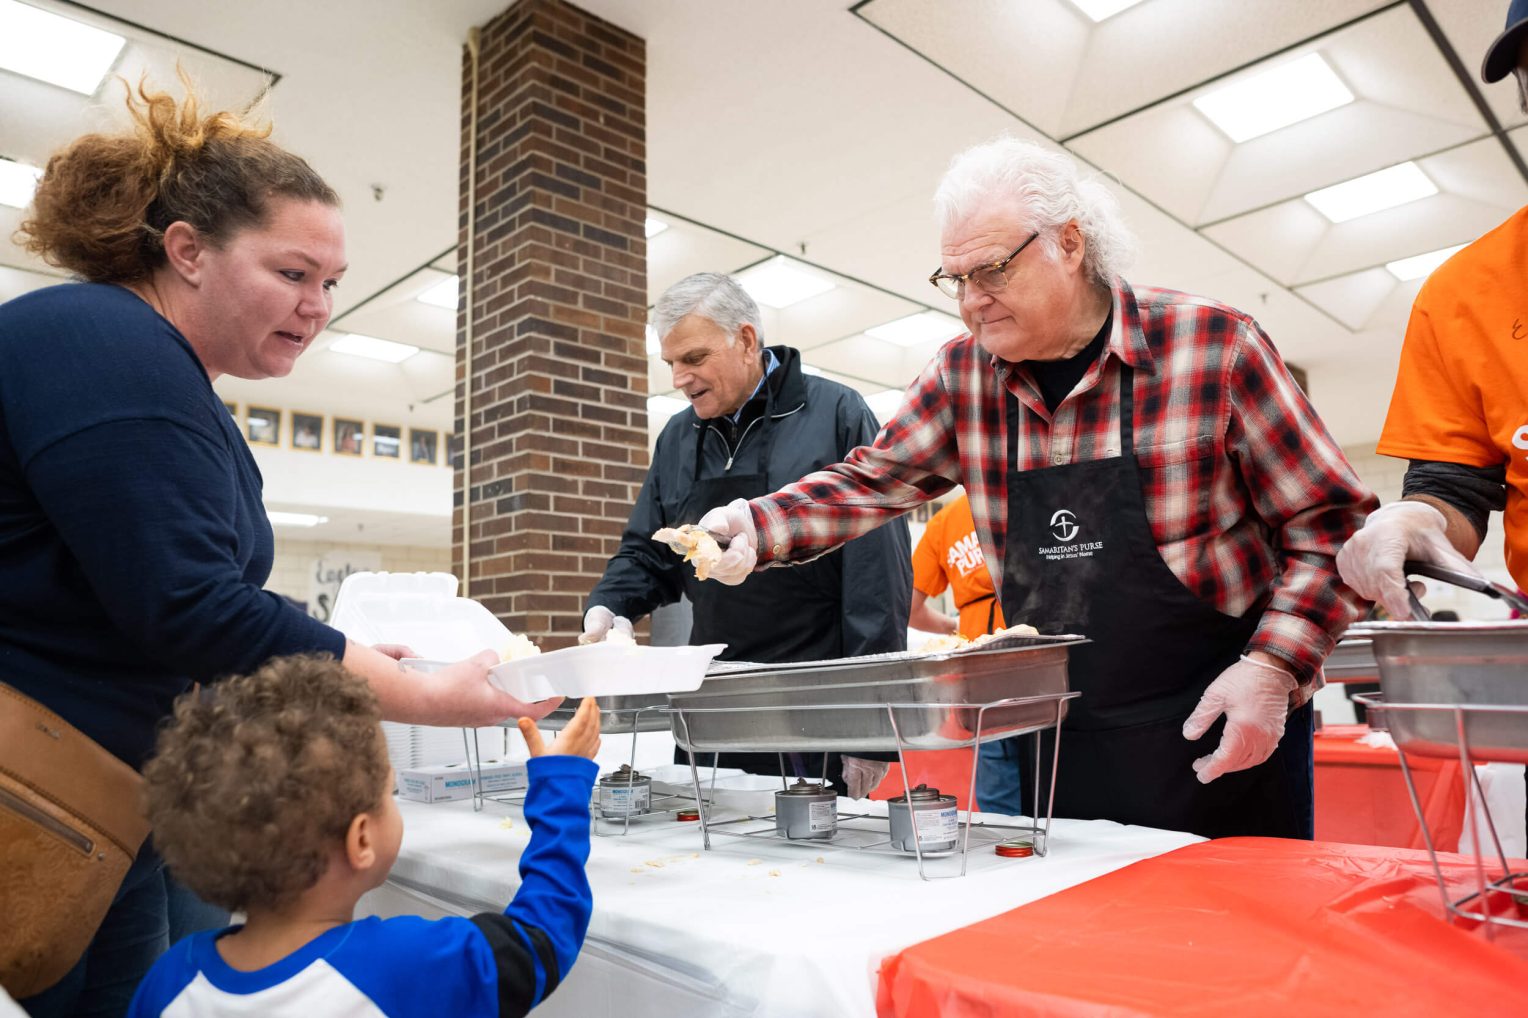 Ricky Skaggs and Franklin Graham served meals on Christmas Eve 2021 in Mayfield.